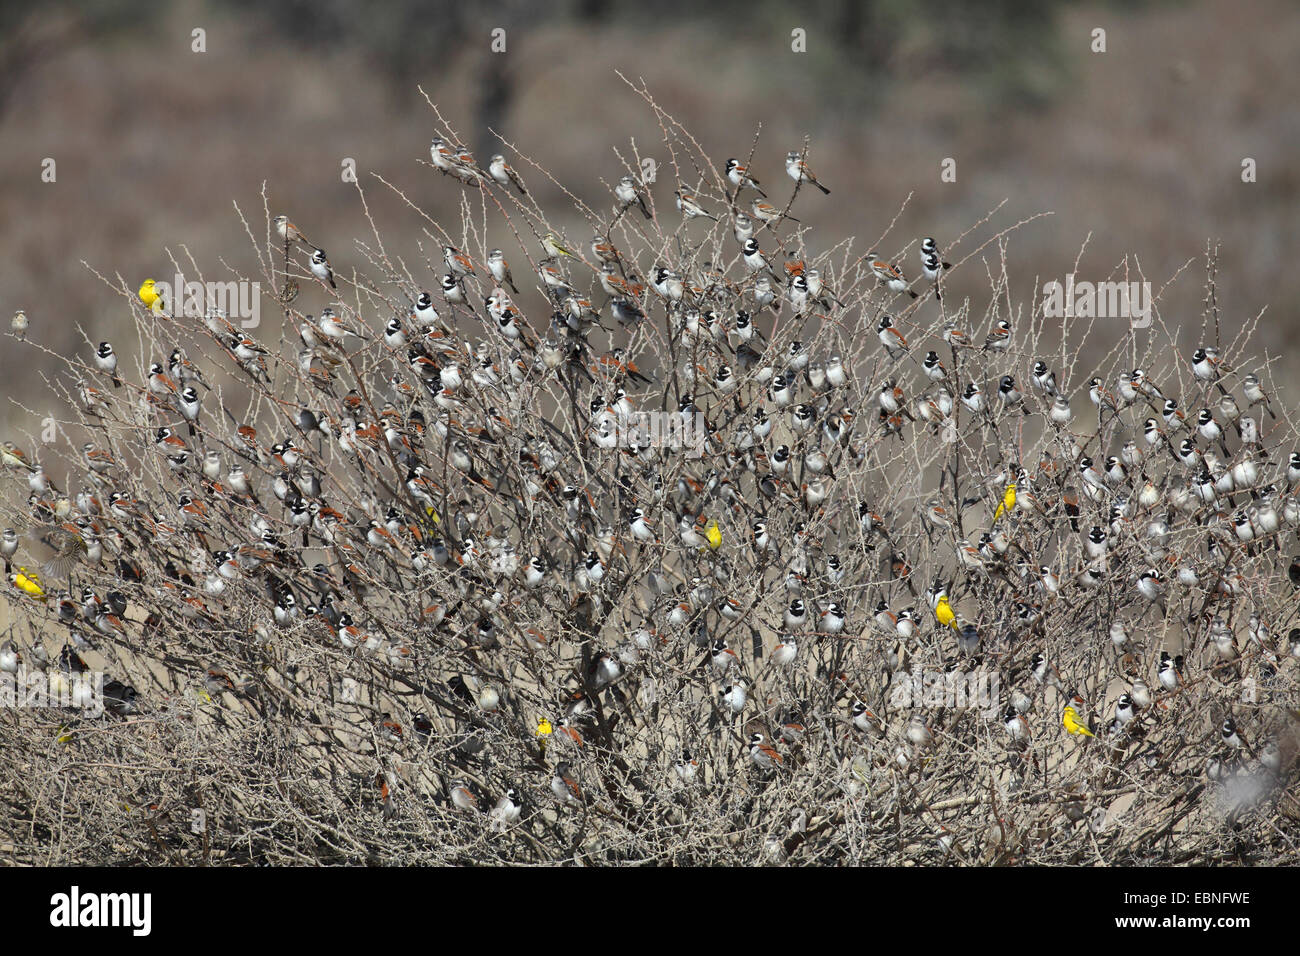 Cape sparrow (Passer melanurus), great flock of cape sparrows and yellow canaries sitting on a thorn bush, South Africa, Kgalagadi Transfrontier National Park Stock Photo